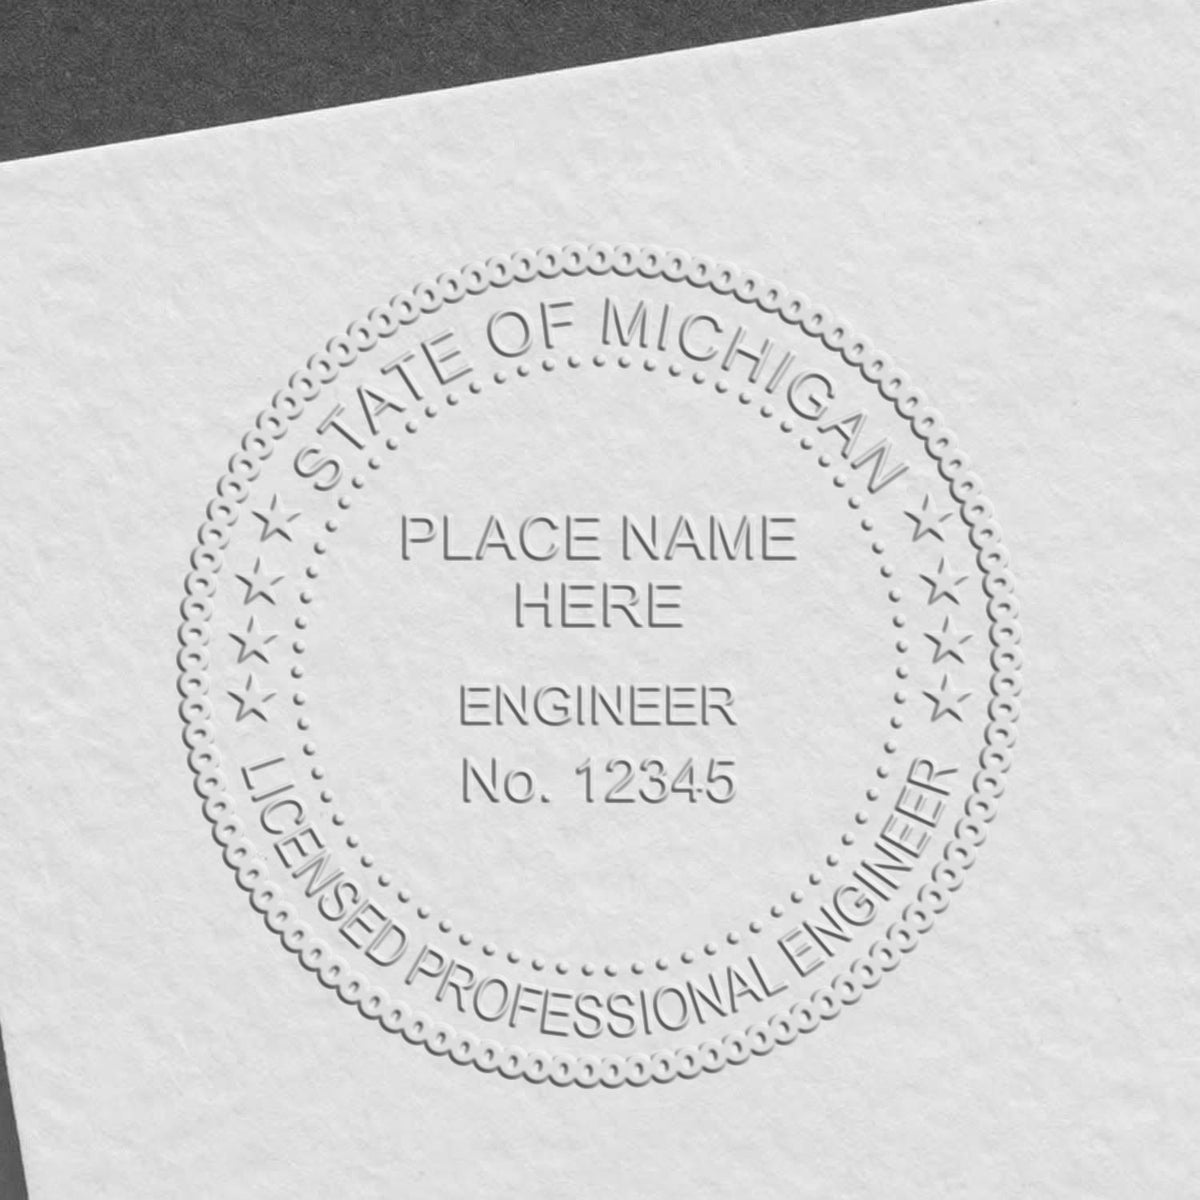 A stamped impression of the Long Reach Michigan PE Seal in this stylish lifestyle photo, setting the tone for a unique and personalized product.